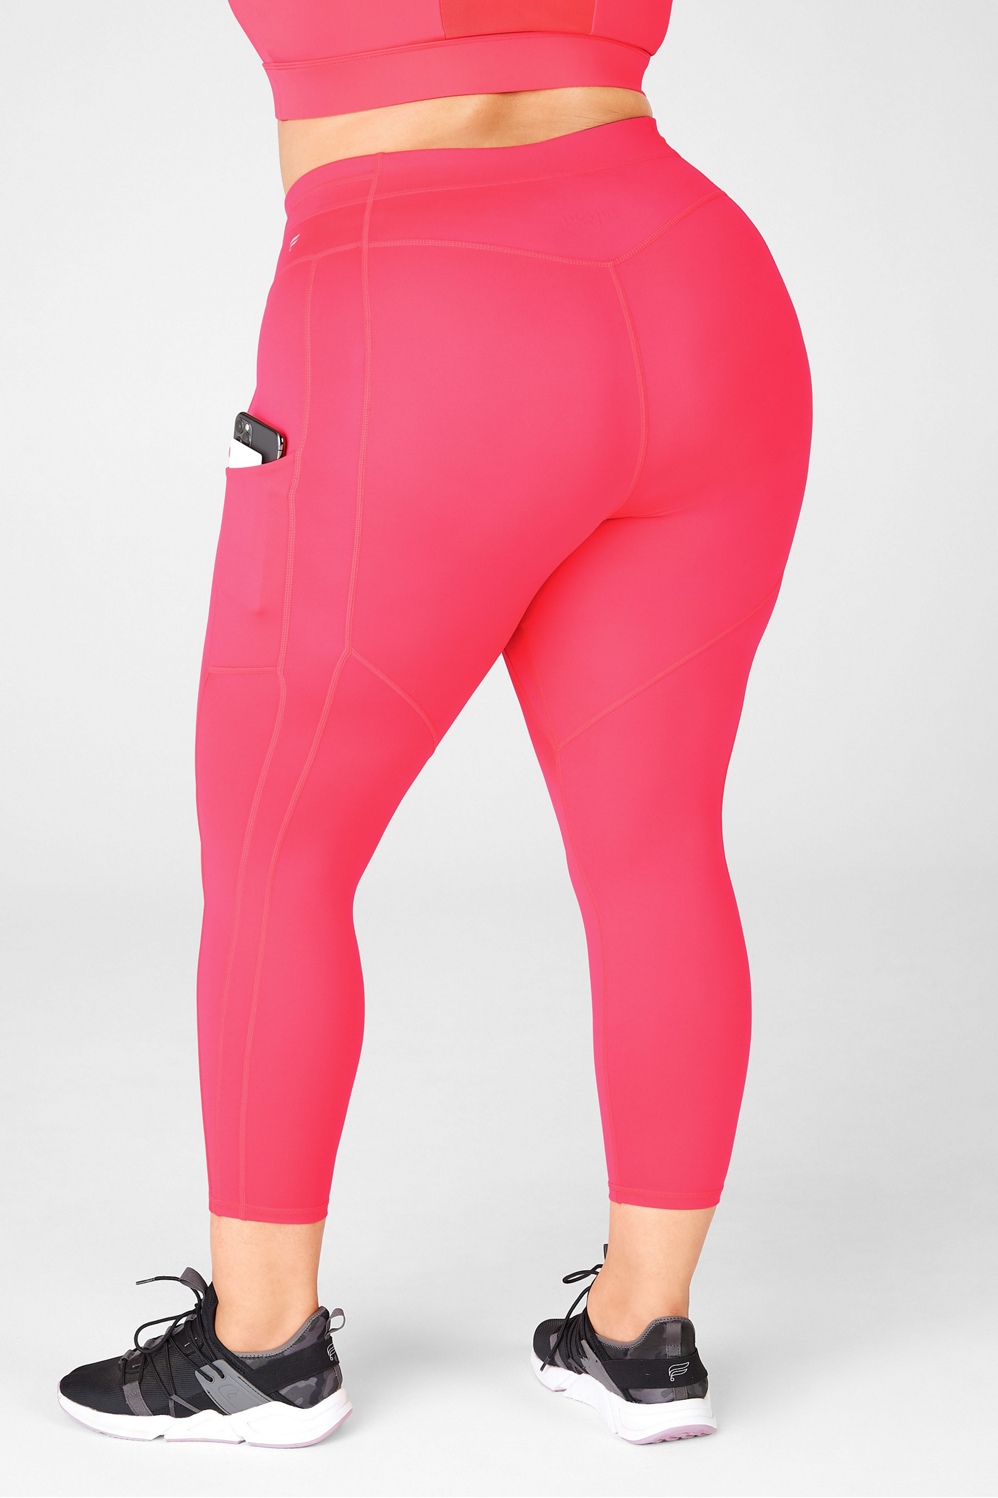 NWT Fabletics 2X Hot Pink High Waisted Motion365 Paneled Leggings